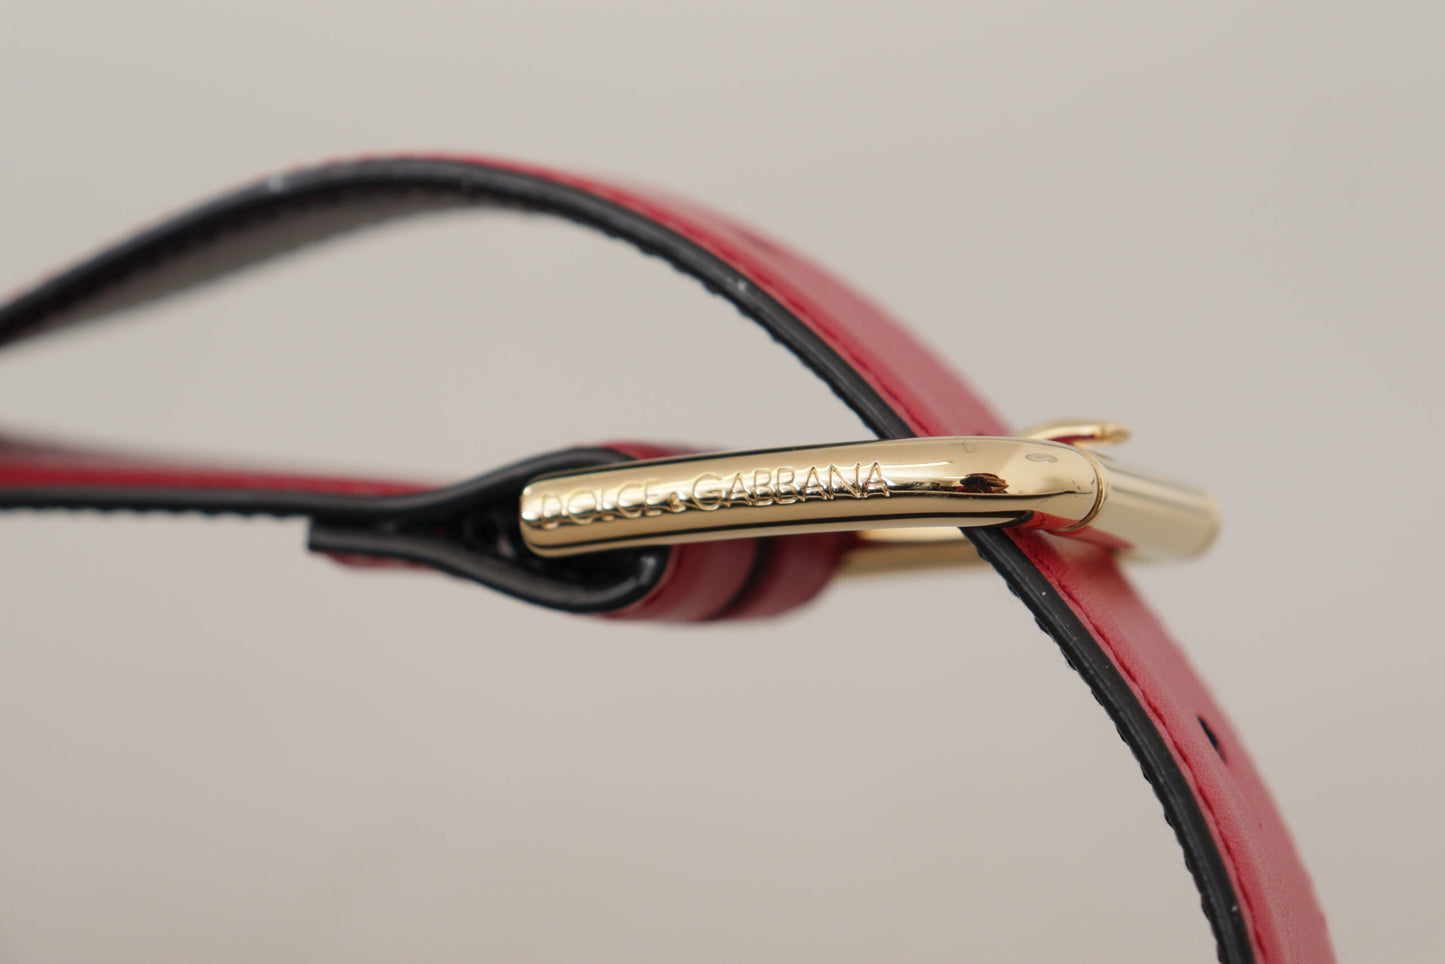 Dolce & Gabbana Elegant Red Leather Belt with Gold-Tone Buckle